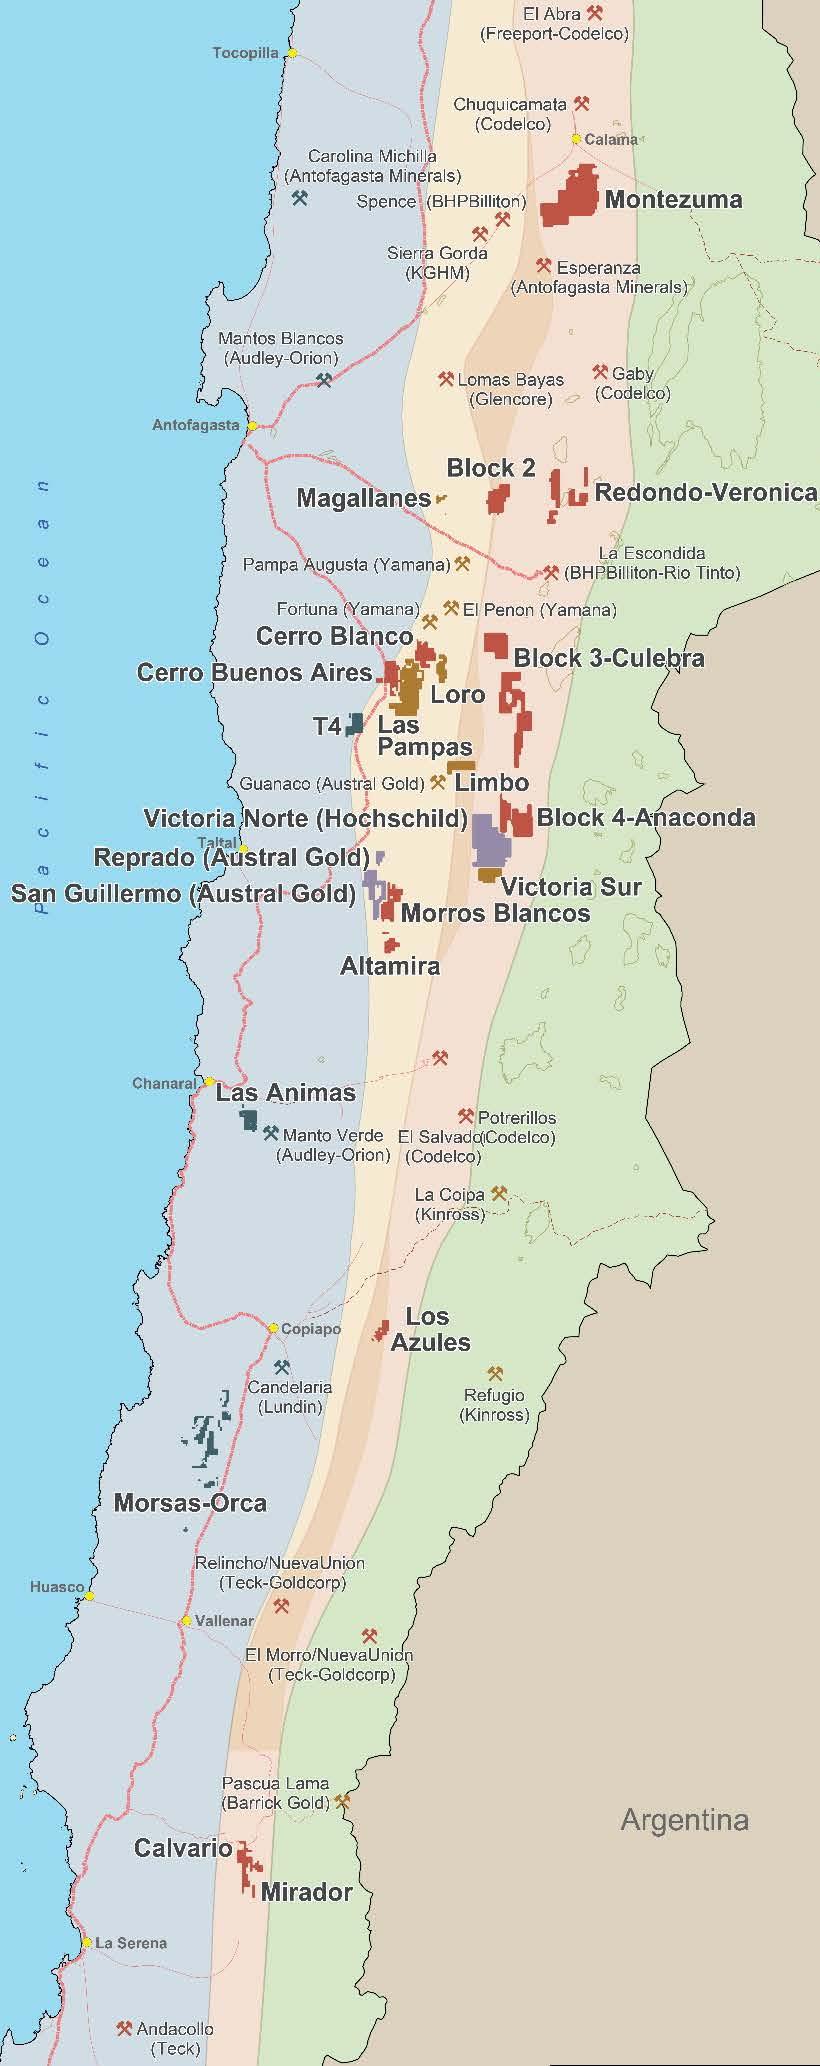 LOCATION Mirador is located in northern Chile approximately 85 km northeast of the coastal city of La Serena, and in a similar geological setting to, and approximately 125 km south-southwest of the